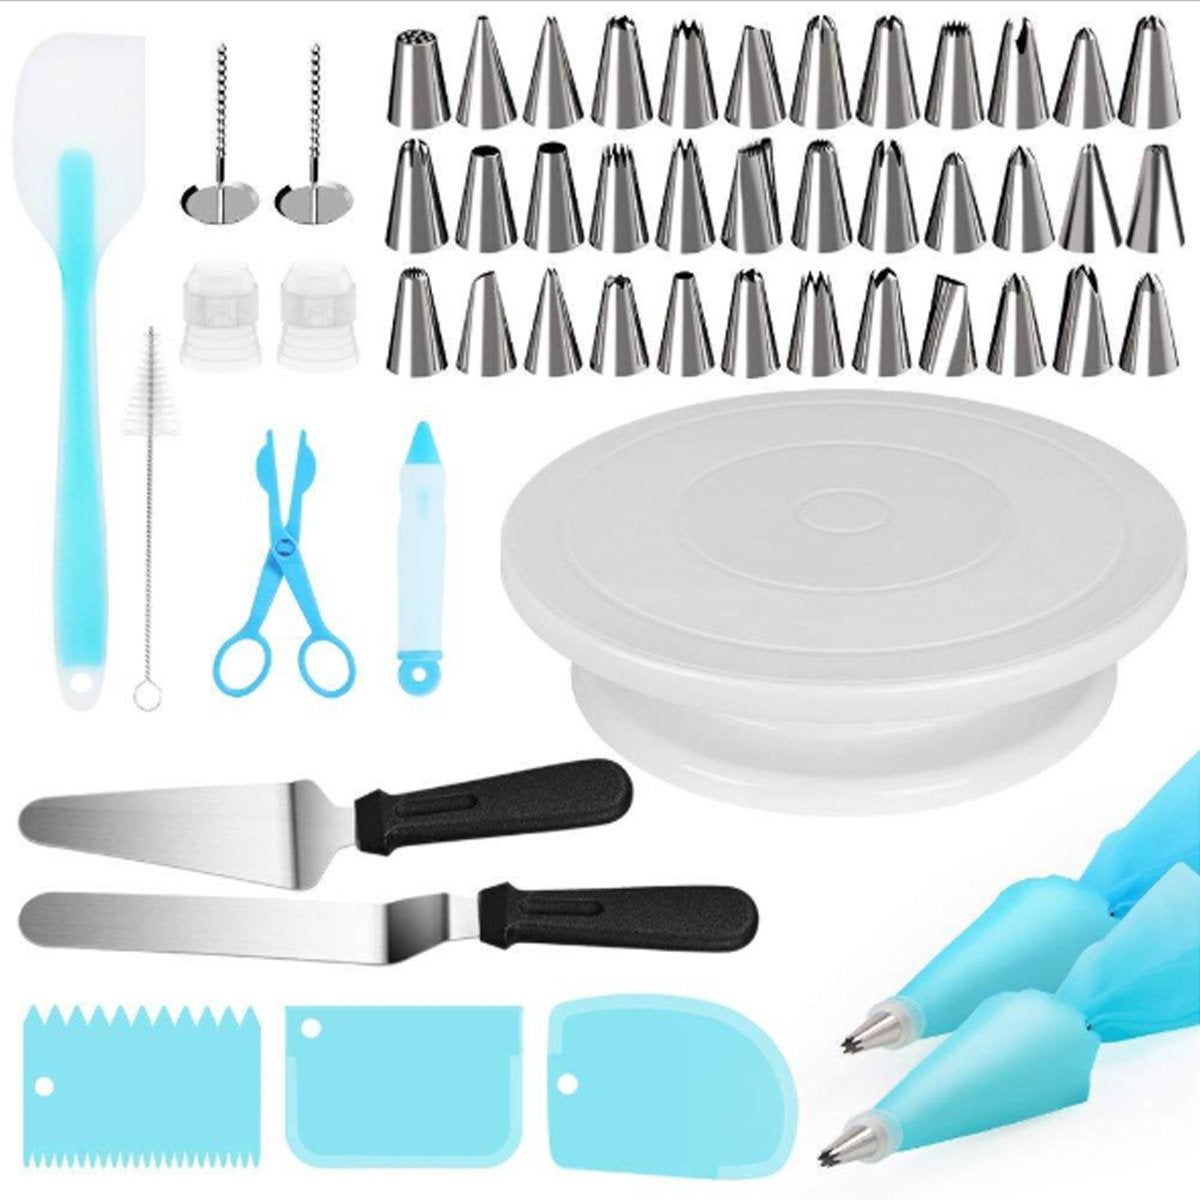 52Pcs / Set Cake Decoration Tools Piping Bags Nozzles Other Baking Supplies